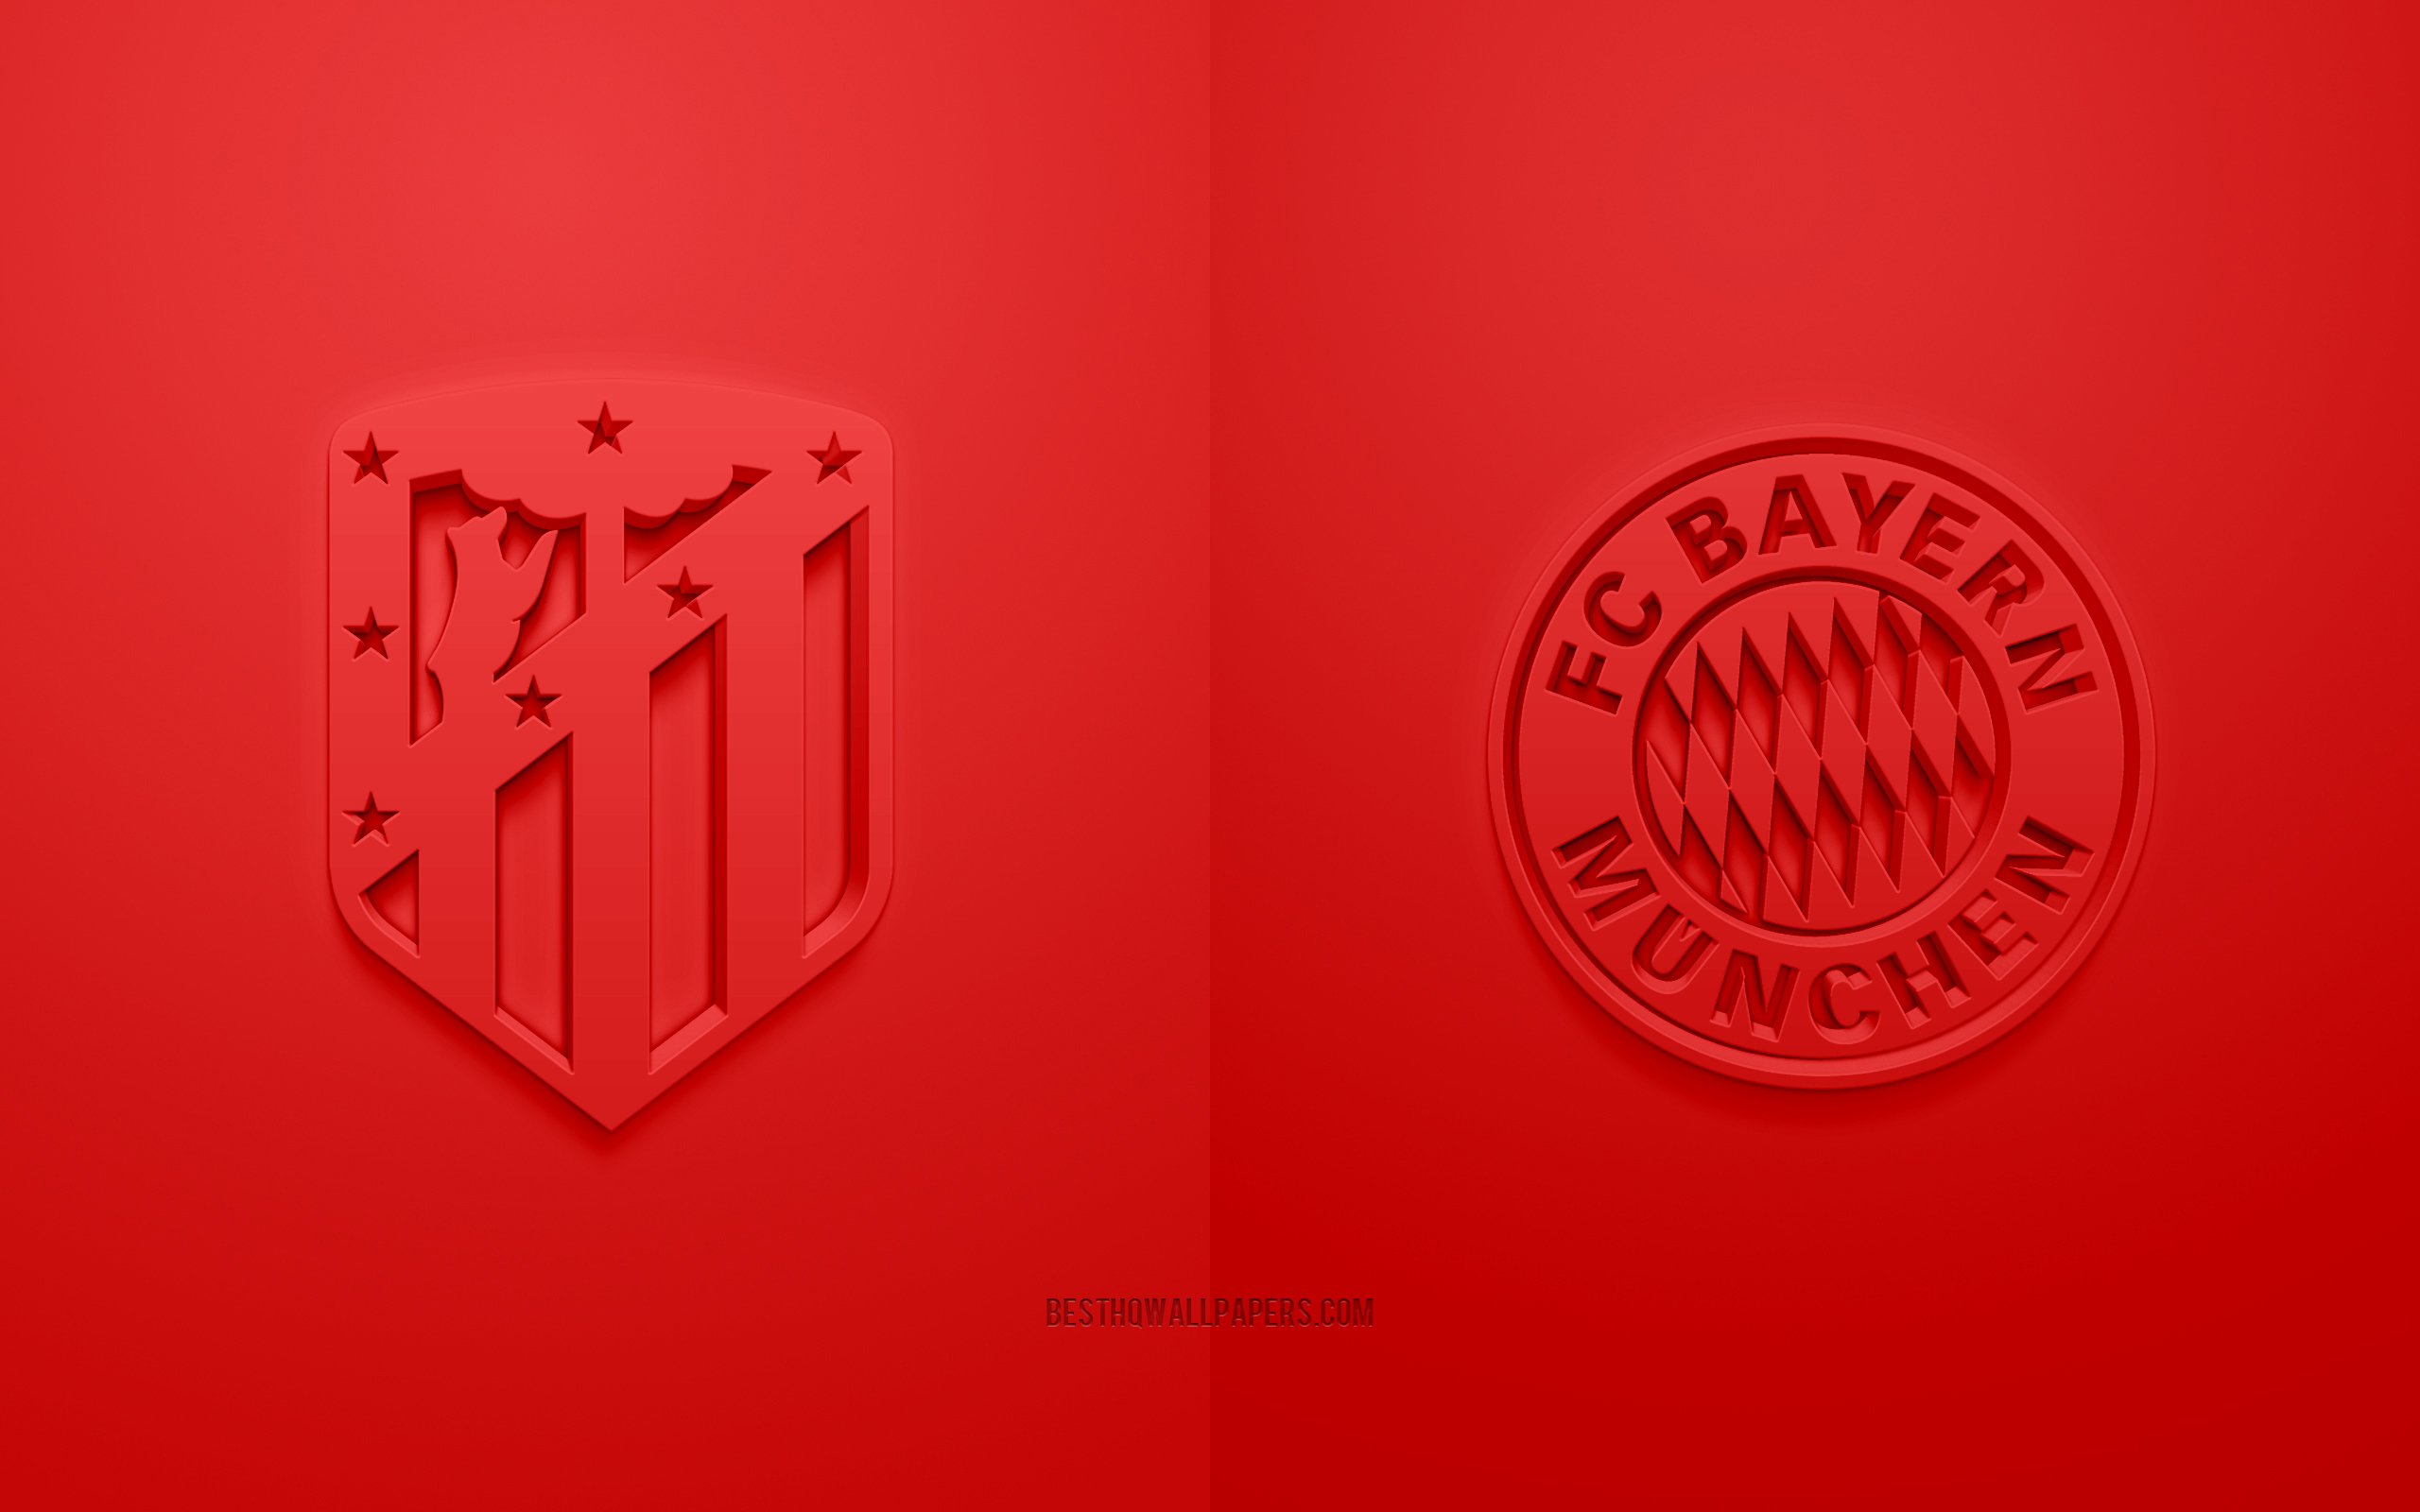 Download Wallpapers Atletico Madrid Vs Bayern Munich Uefa Champions League Group A 3d Logos Red Background Champions League Football Match Atletico Madrid Fc Bayern Munich For Desktop With Resolution 2560x1600 High Quality